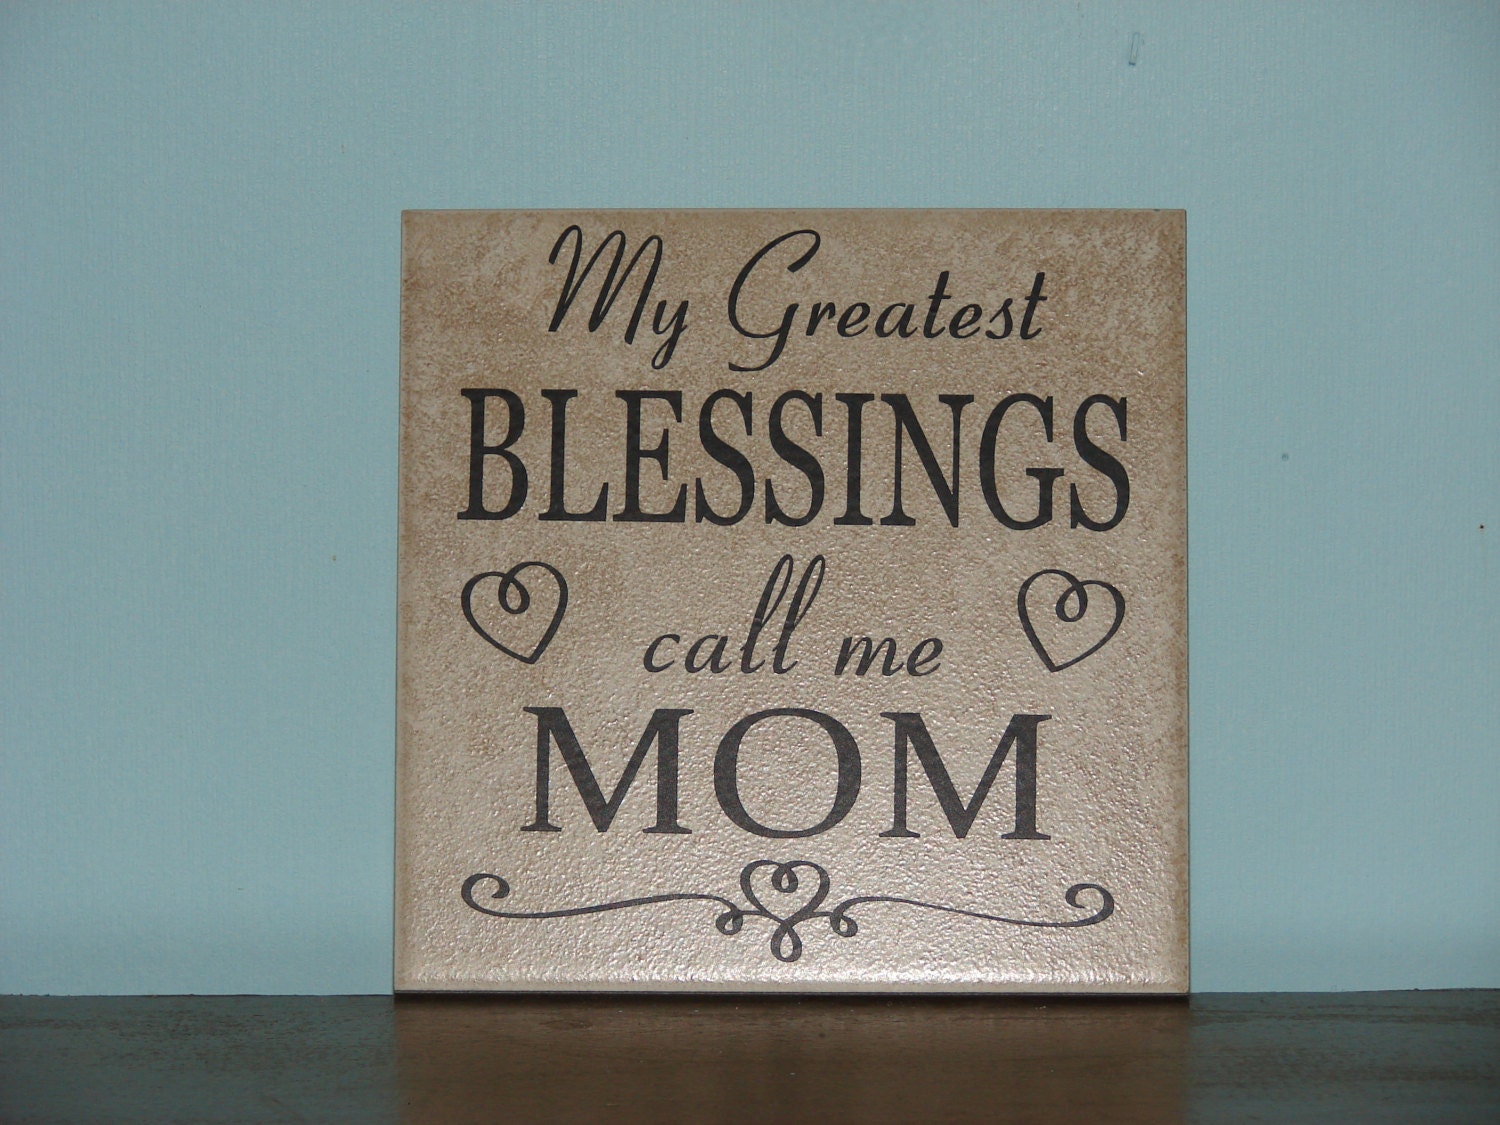 My Greatest BLESSINGS call me MOM Decorative Tile saying